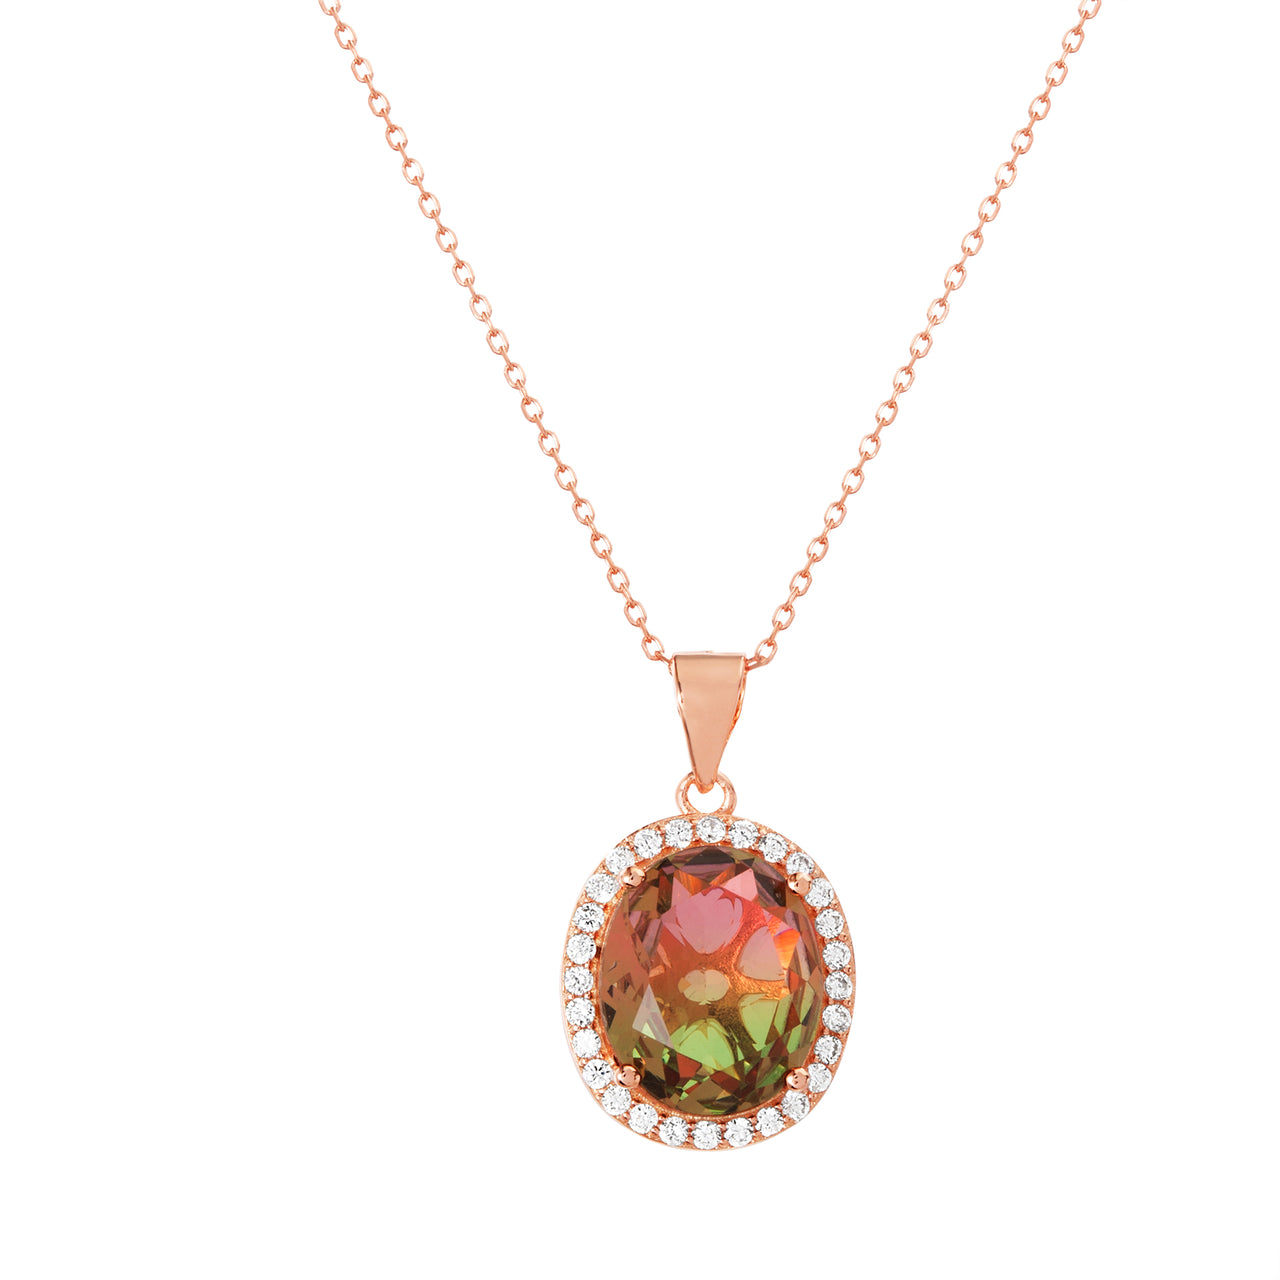 Lesa Michele Simulated Watermelon Tourmaline & Cubic Zirconia Pendant in Rose Gold Plated Sterling Silver